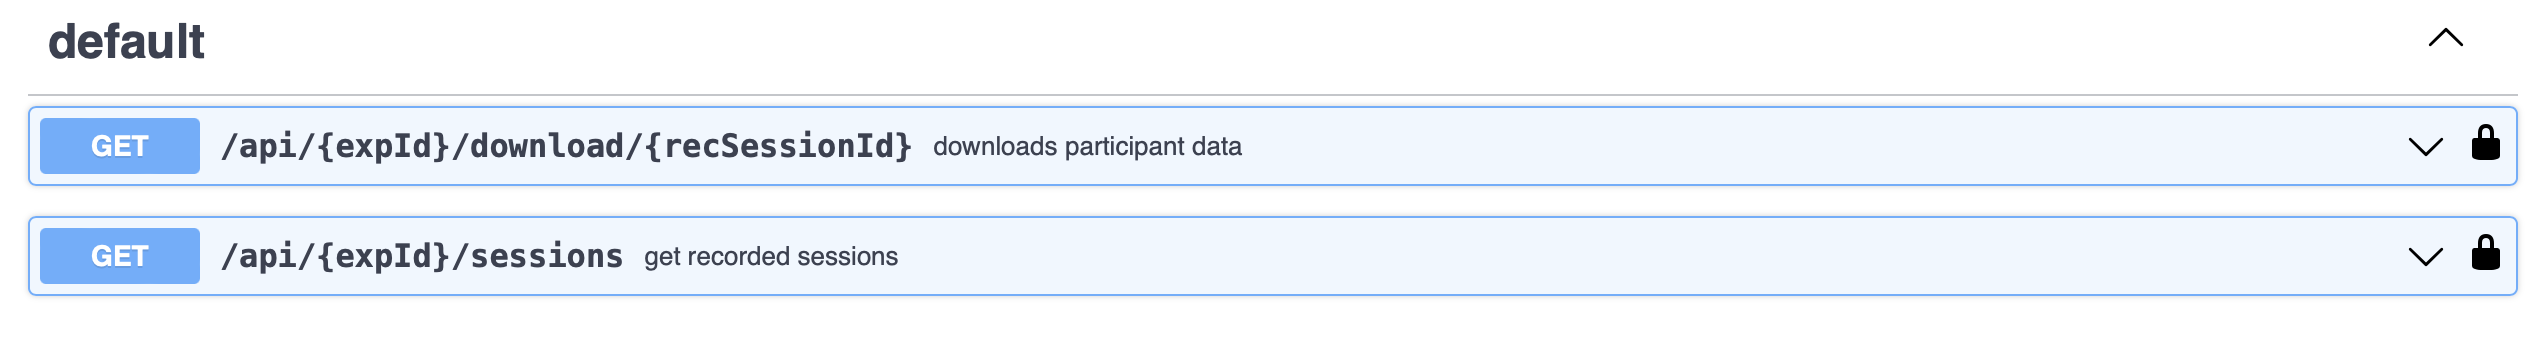 Data options from the REST API for accessing sessions and participant data